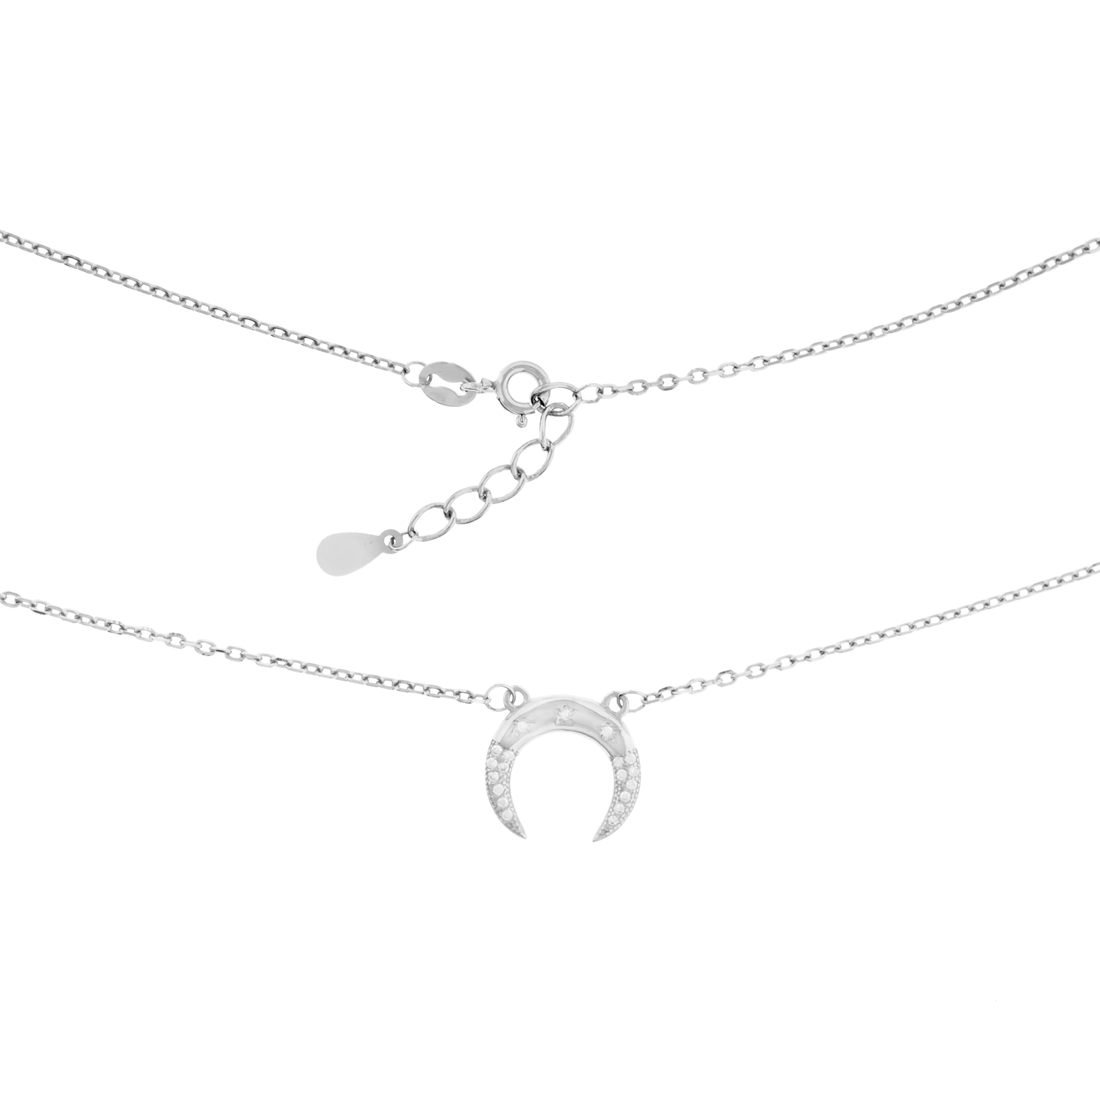 White CZ Moon Necklace 18 in